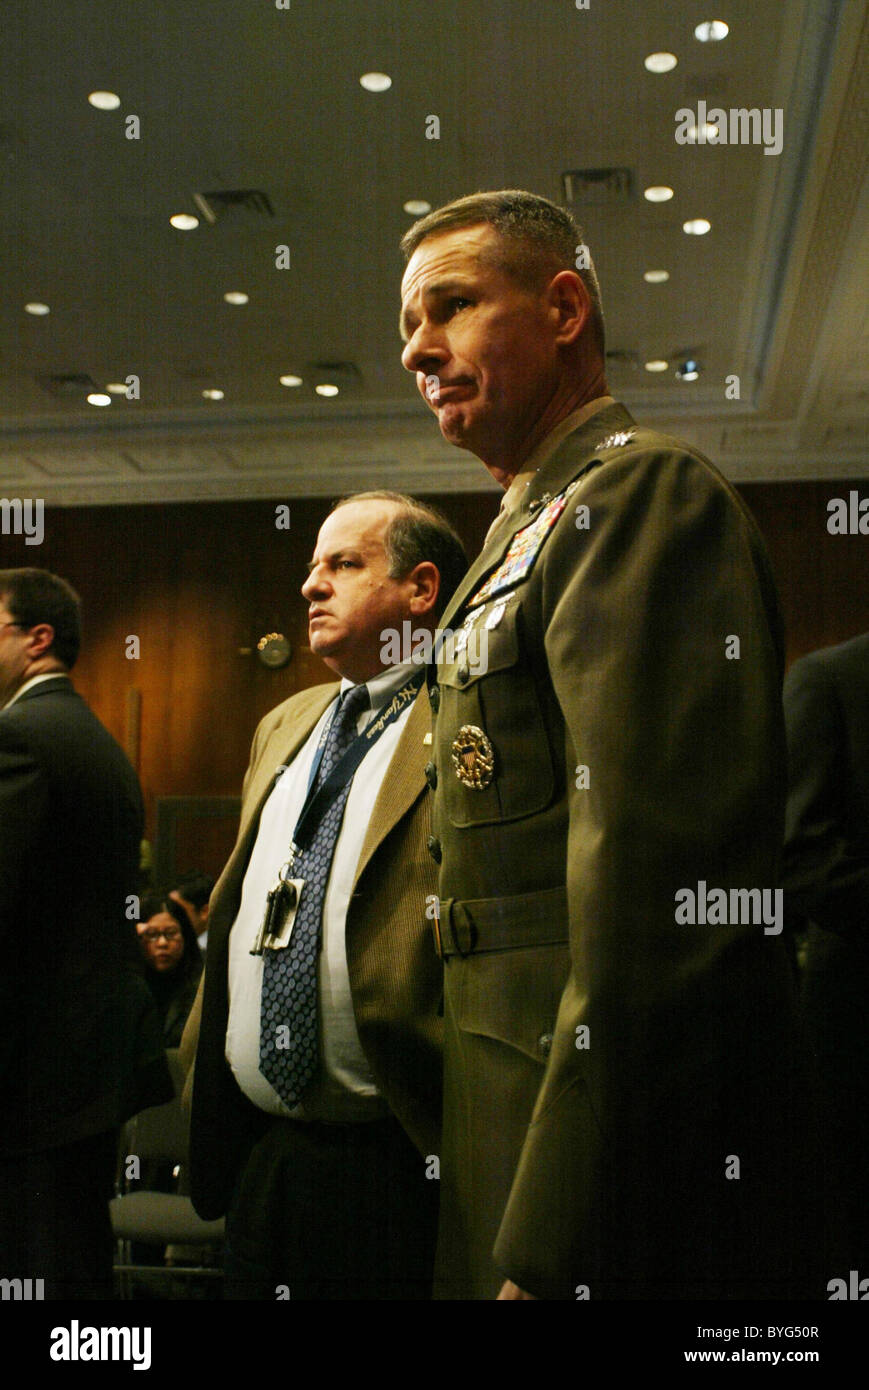 General Peter Pace The Appropriations Committee met on the Iraq-Afghanistan war funding Washington D.C., USA - 27.02.07 Stock Photo